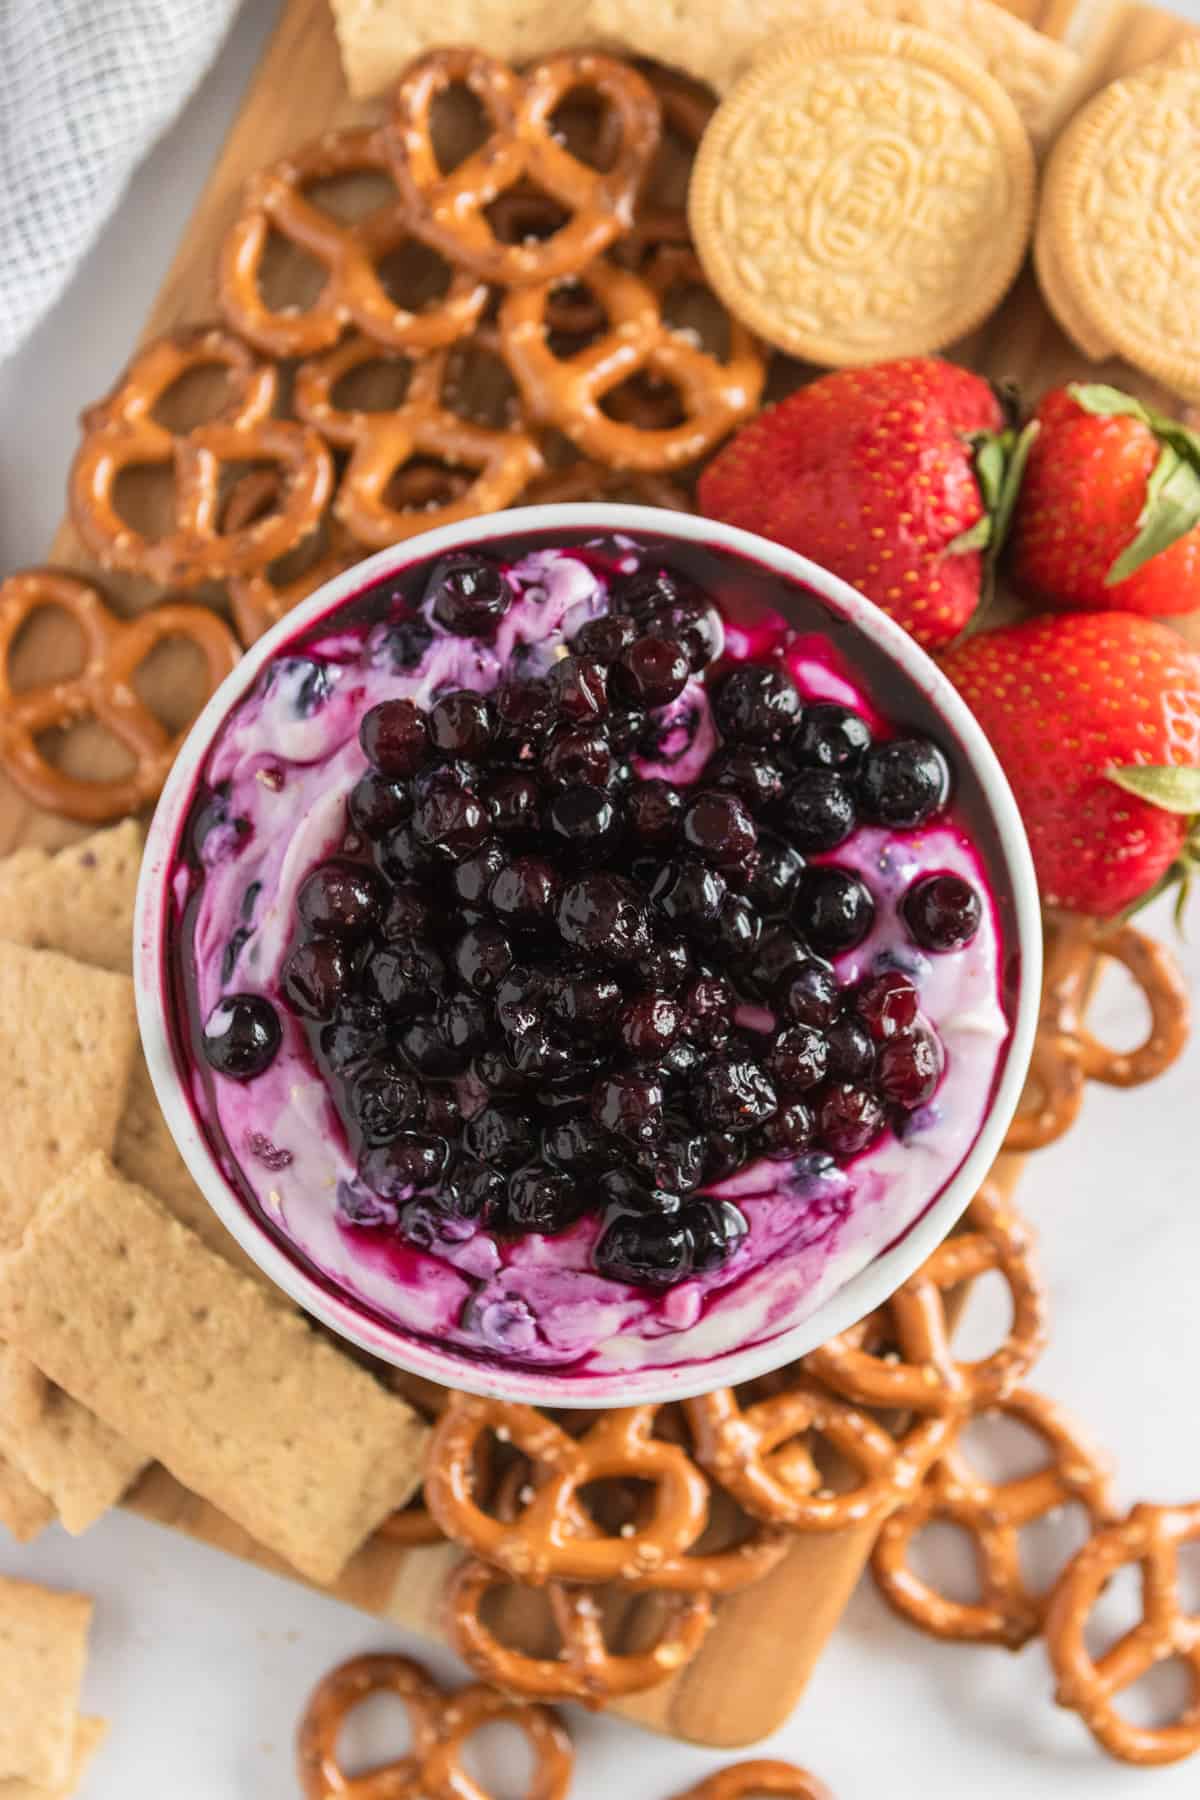 Blueberry cheesecake dip on platter with graham crackers, strawberries, pretzels.